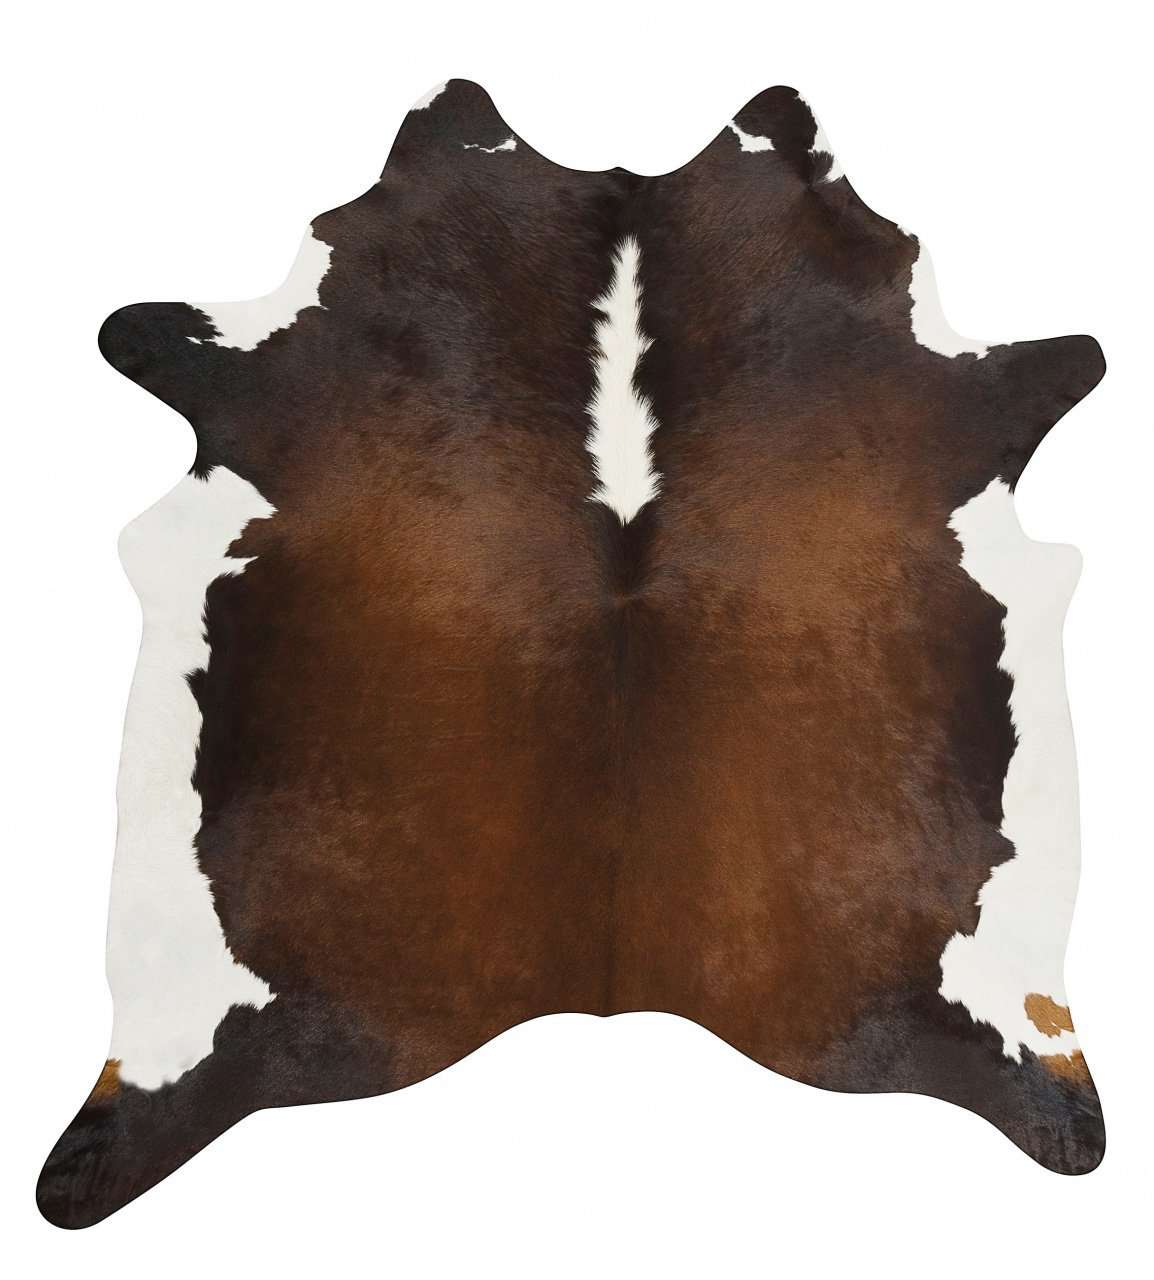 Rug Culture RUGS 170x120cm Cow Hide - Chocolate